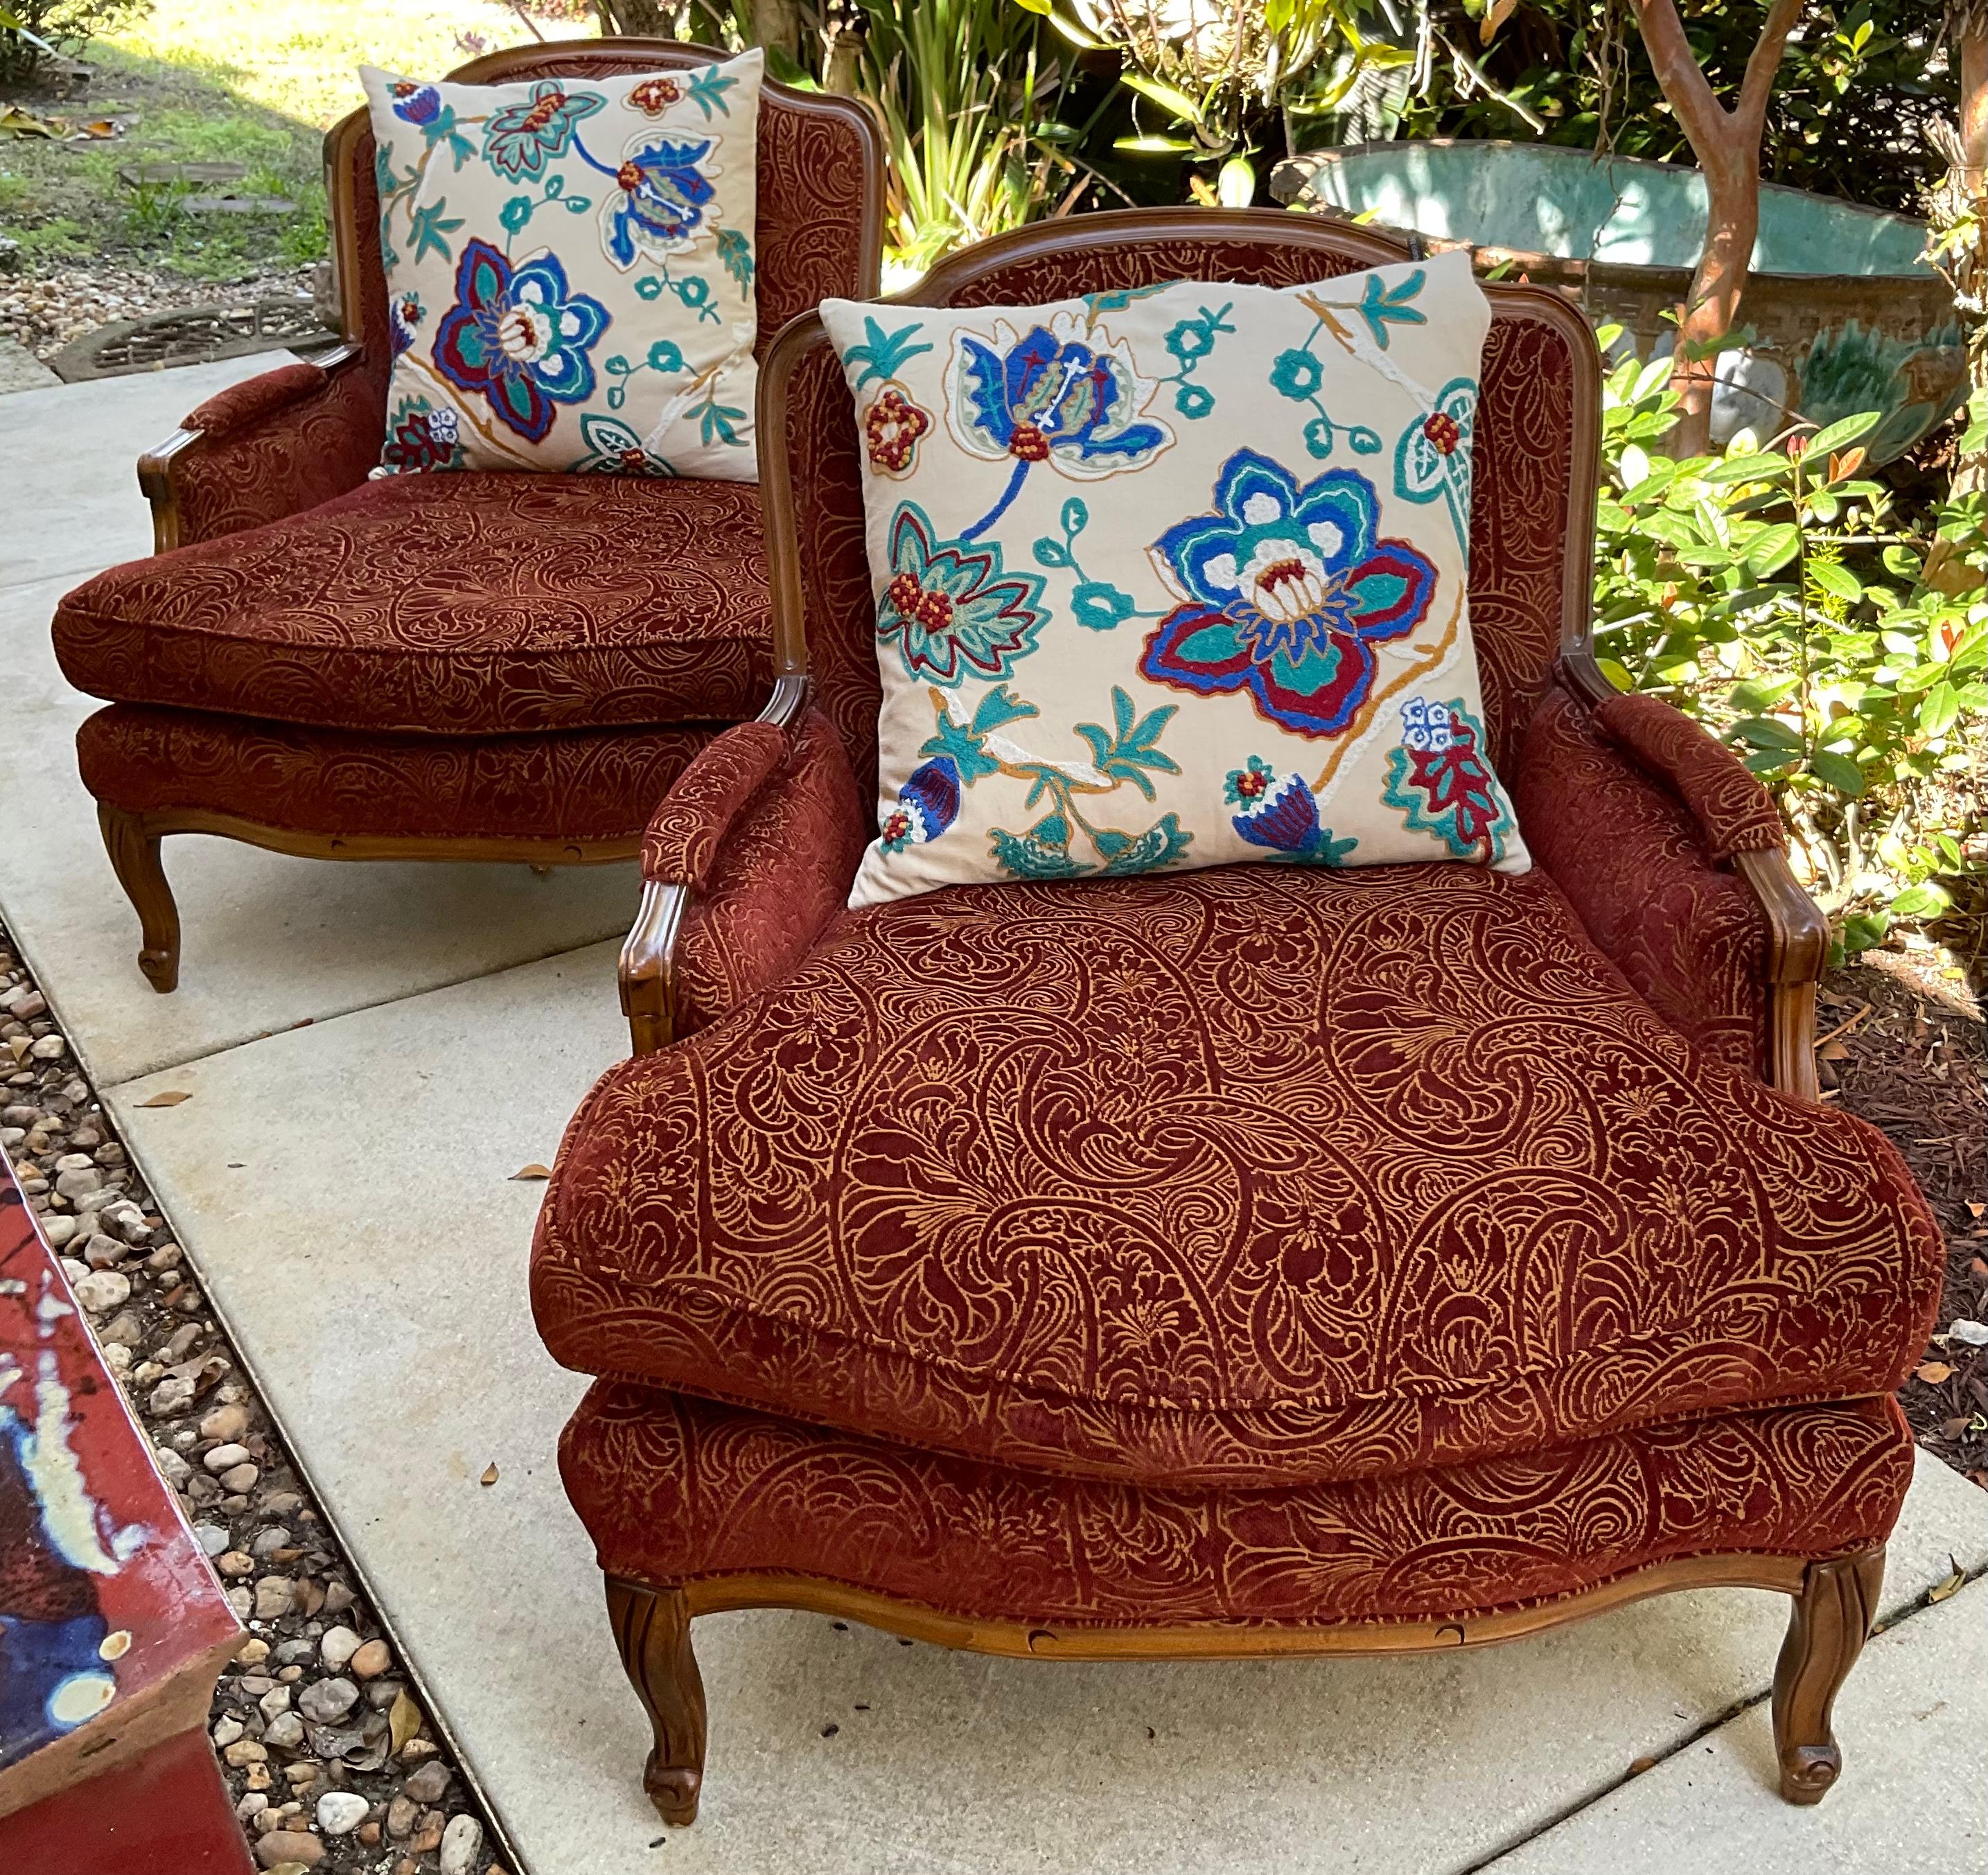 Pair of quality vintage wood hand carved armchairs, French style, deep, oversized seats, upholstered damask patterned fabric.
pillows are not included.